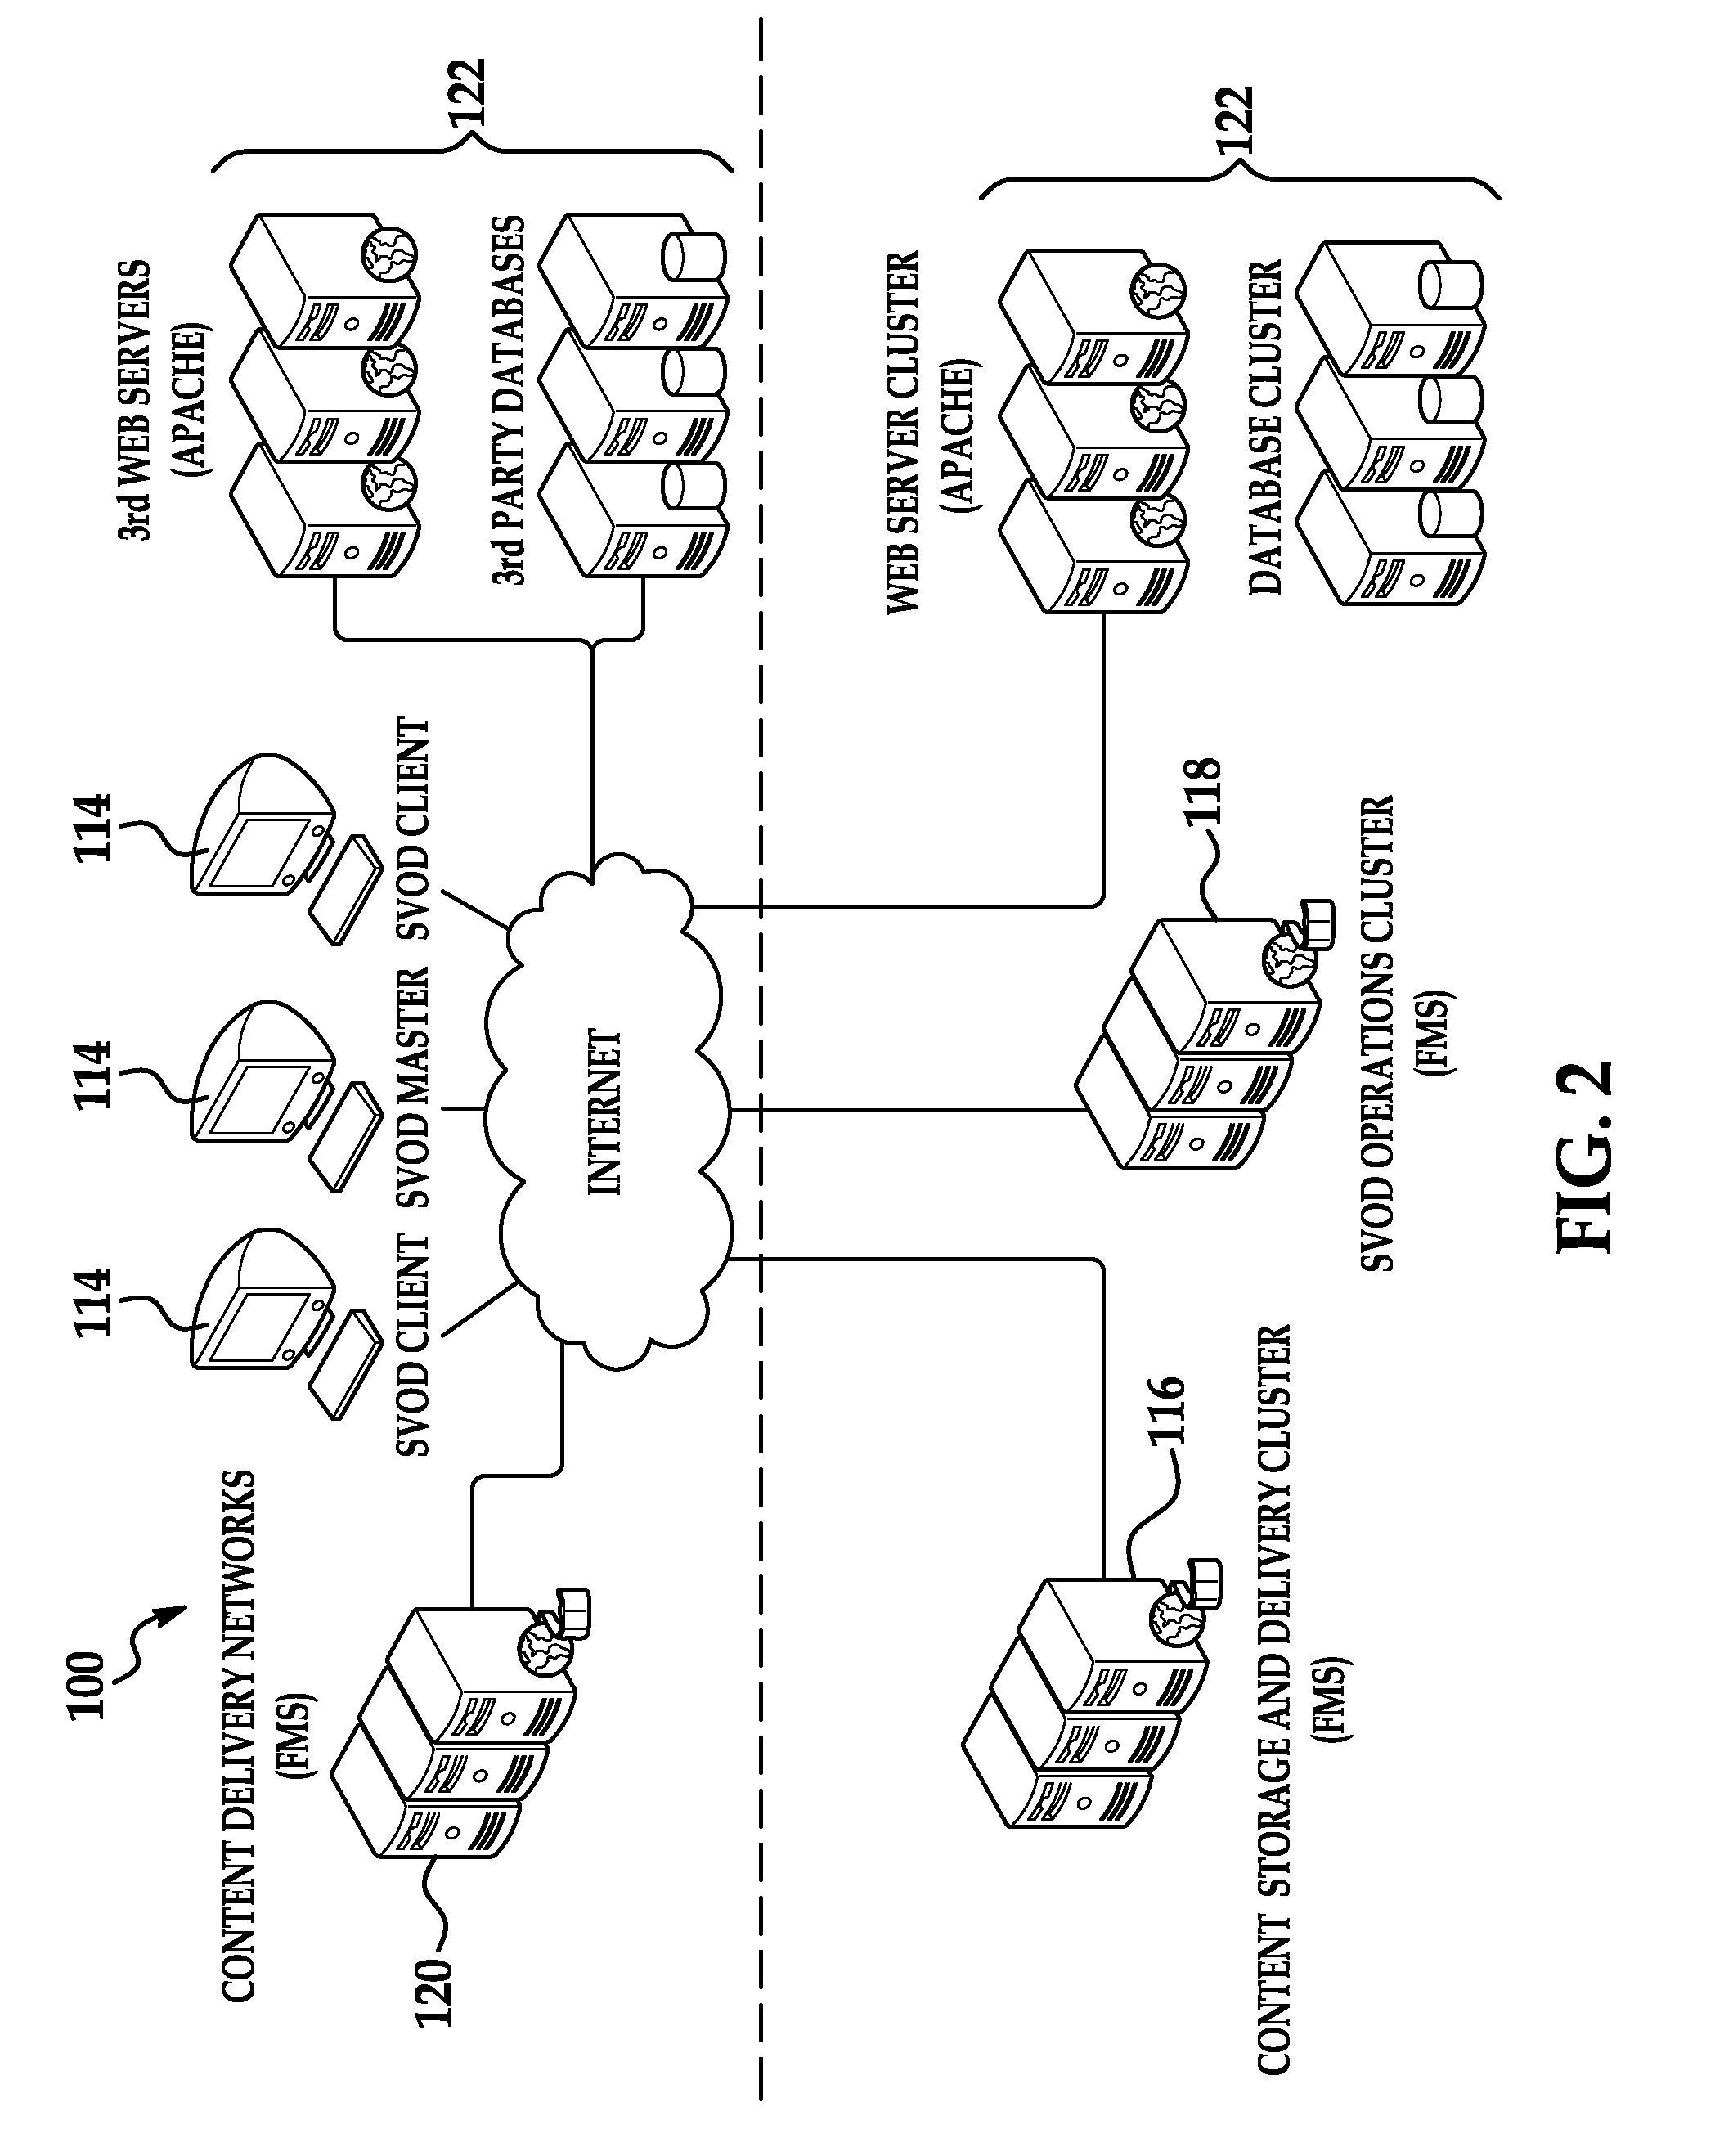 System and Method for Providing a Virtual Environment with Shared Video on Demand